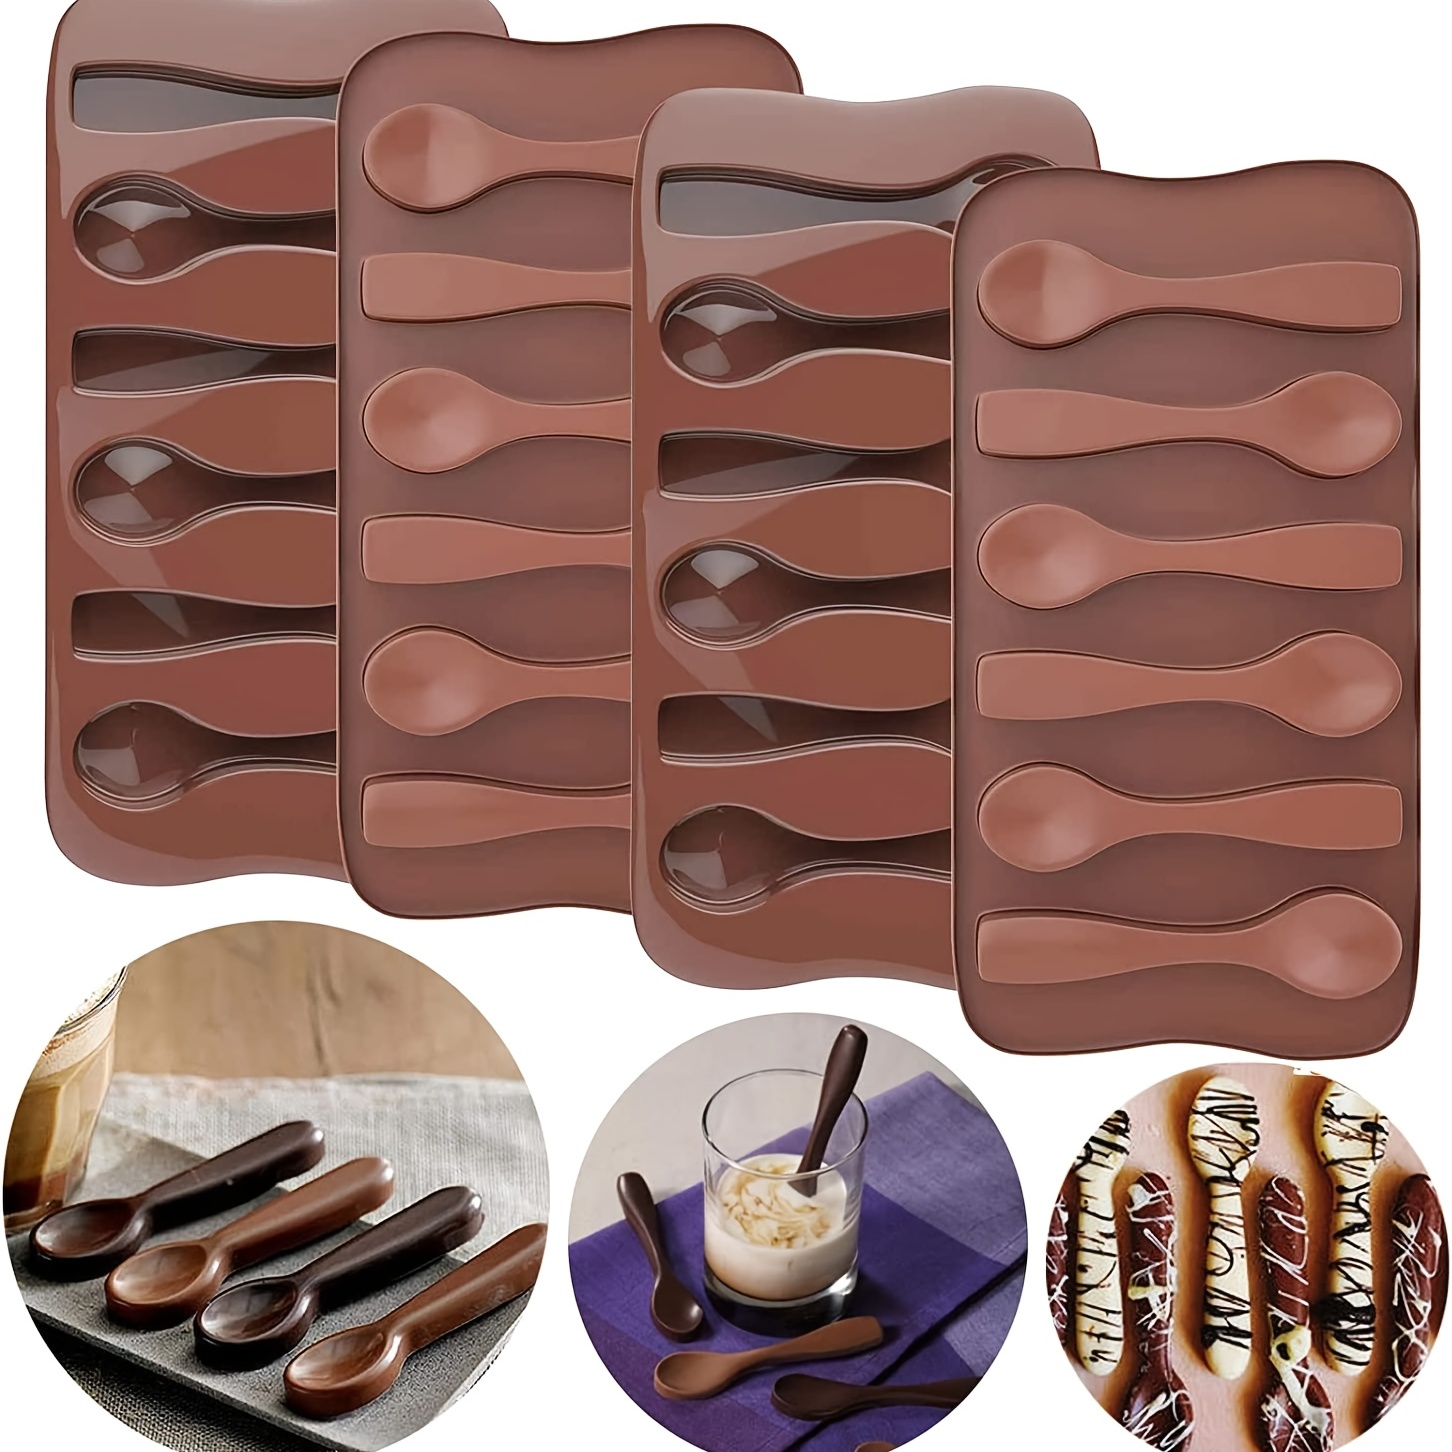 NEW 3 Cavity Rectangle Plaque Base Assortment Chocolate Candy